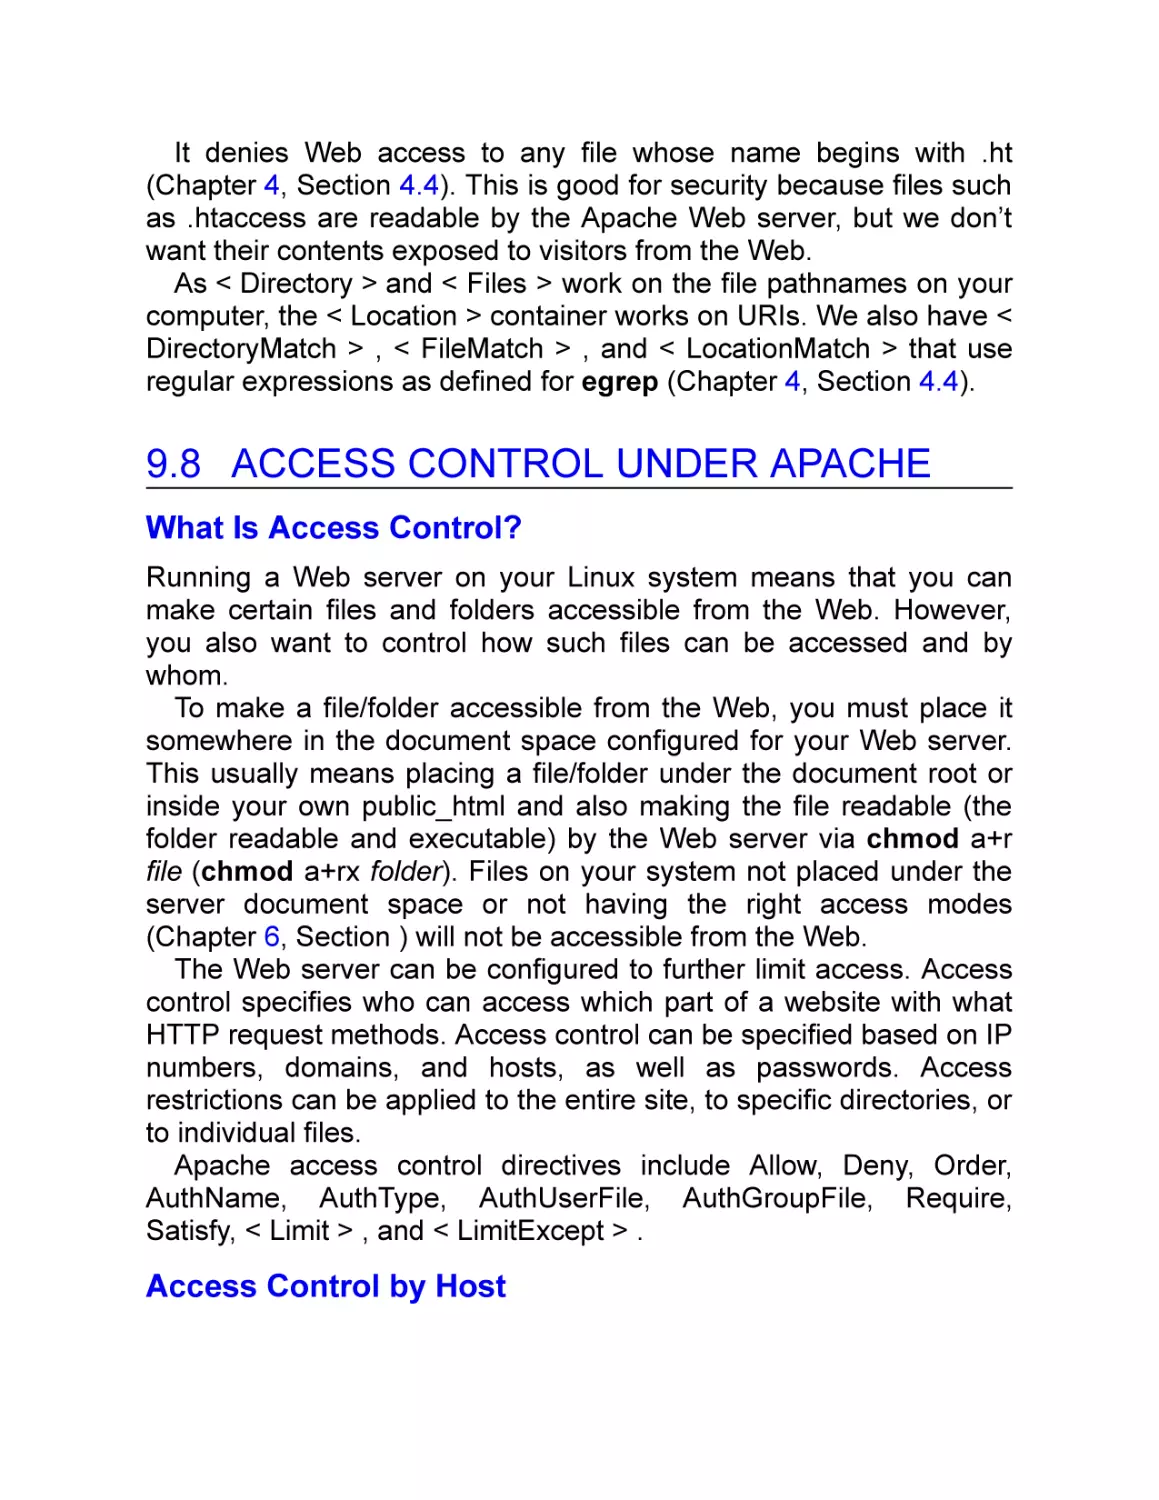 9.8 Access Control under Apache
What Is Access Control?
Access Control by Host